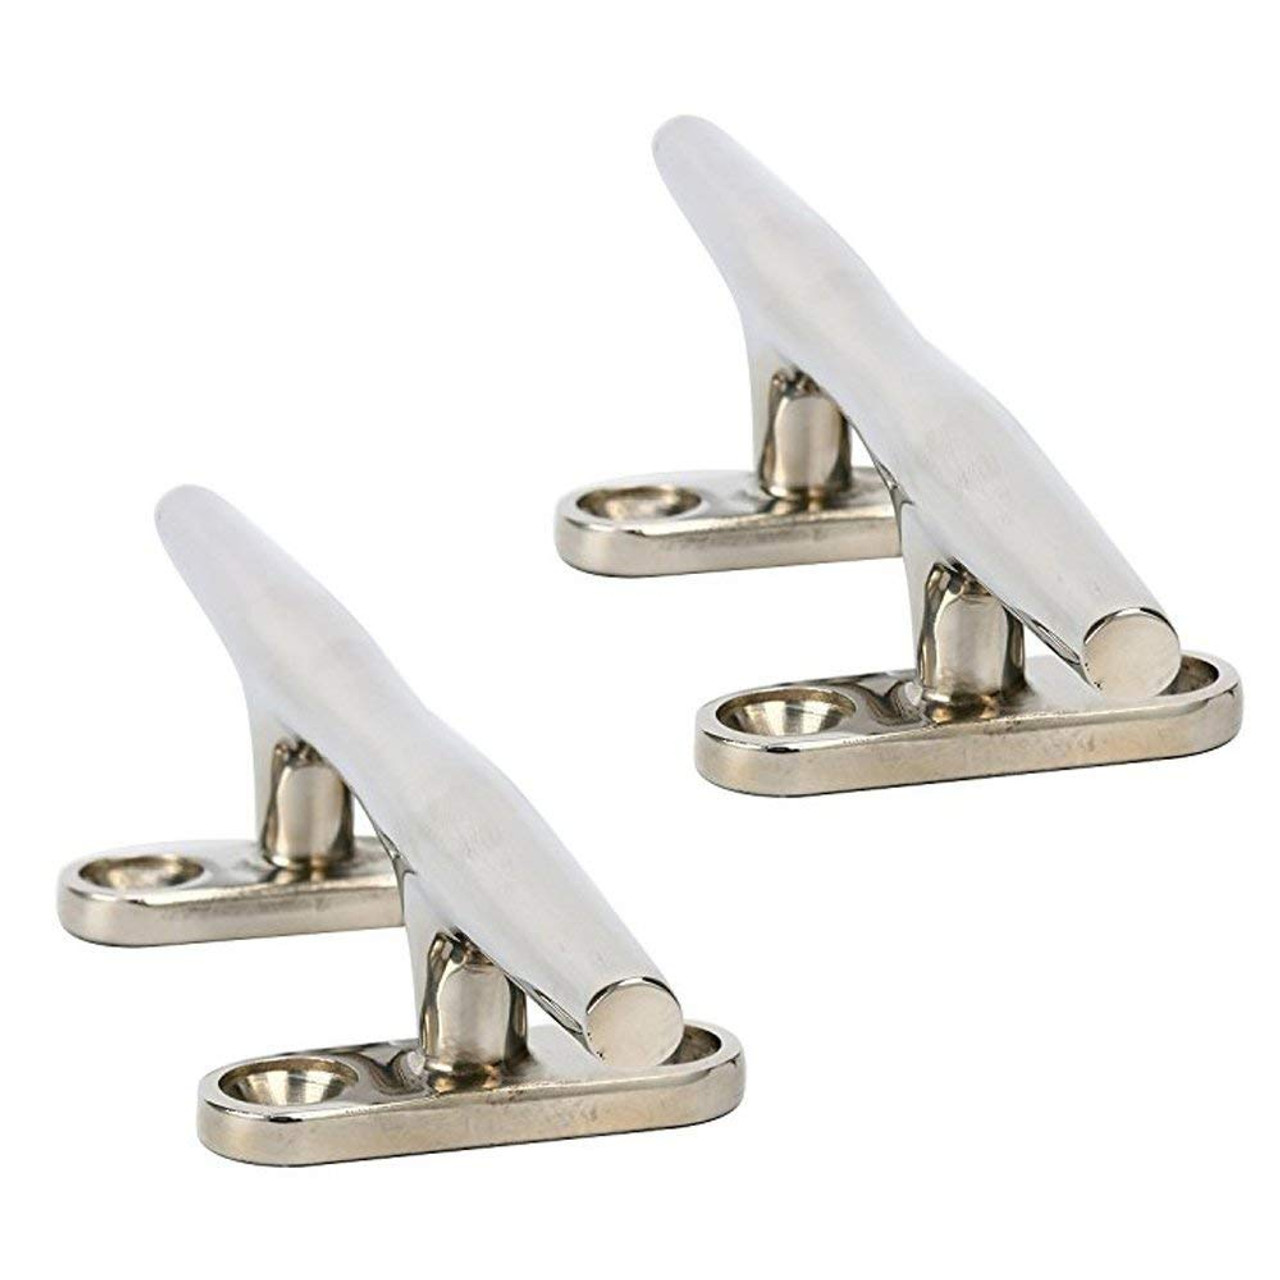 Amarine Made Stainless Steel Open Base Cleat-6 Inch Boat Cleats